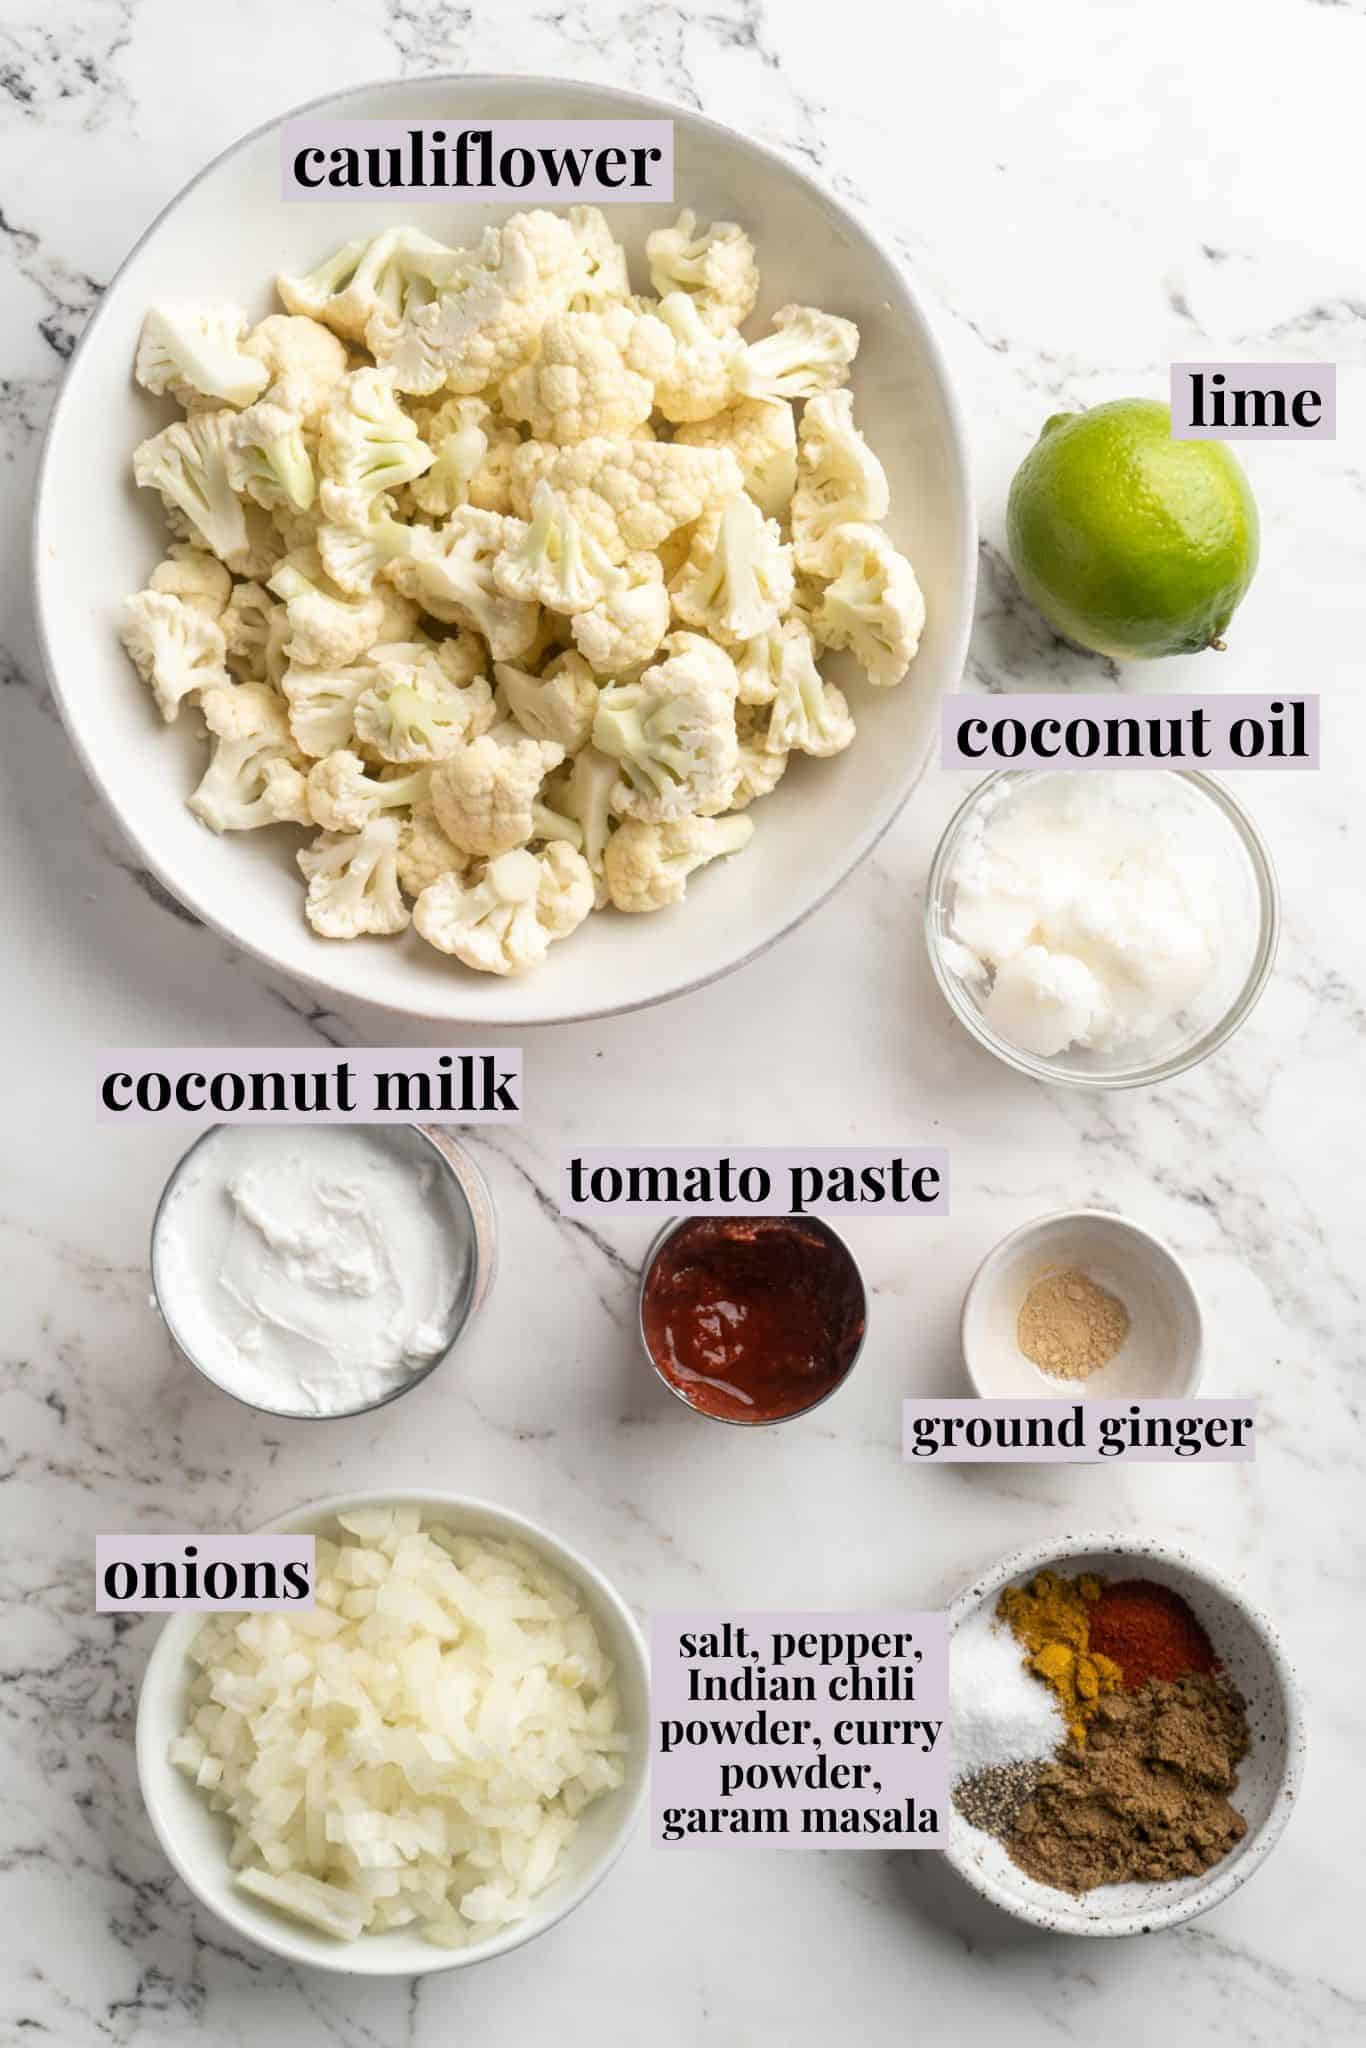 Overhead view of ingredients for butter cauliflower with labels